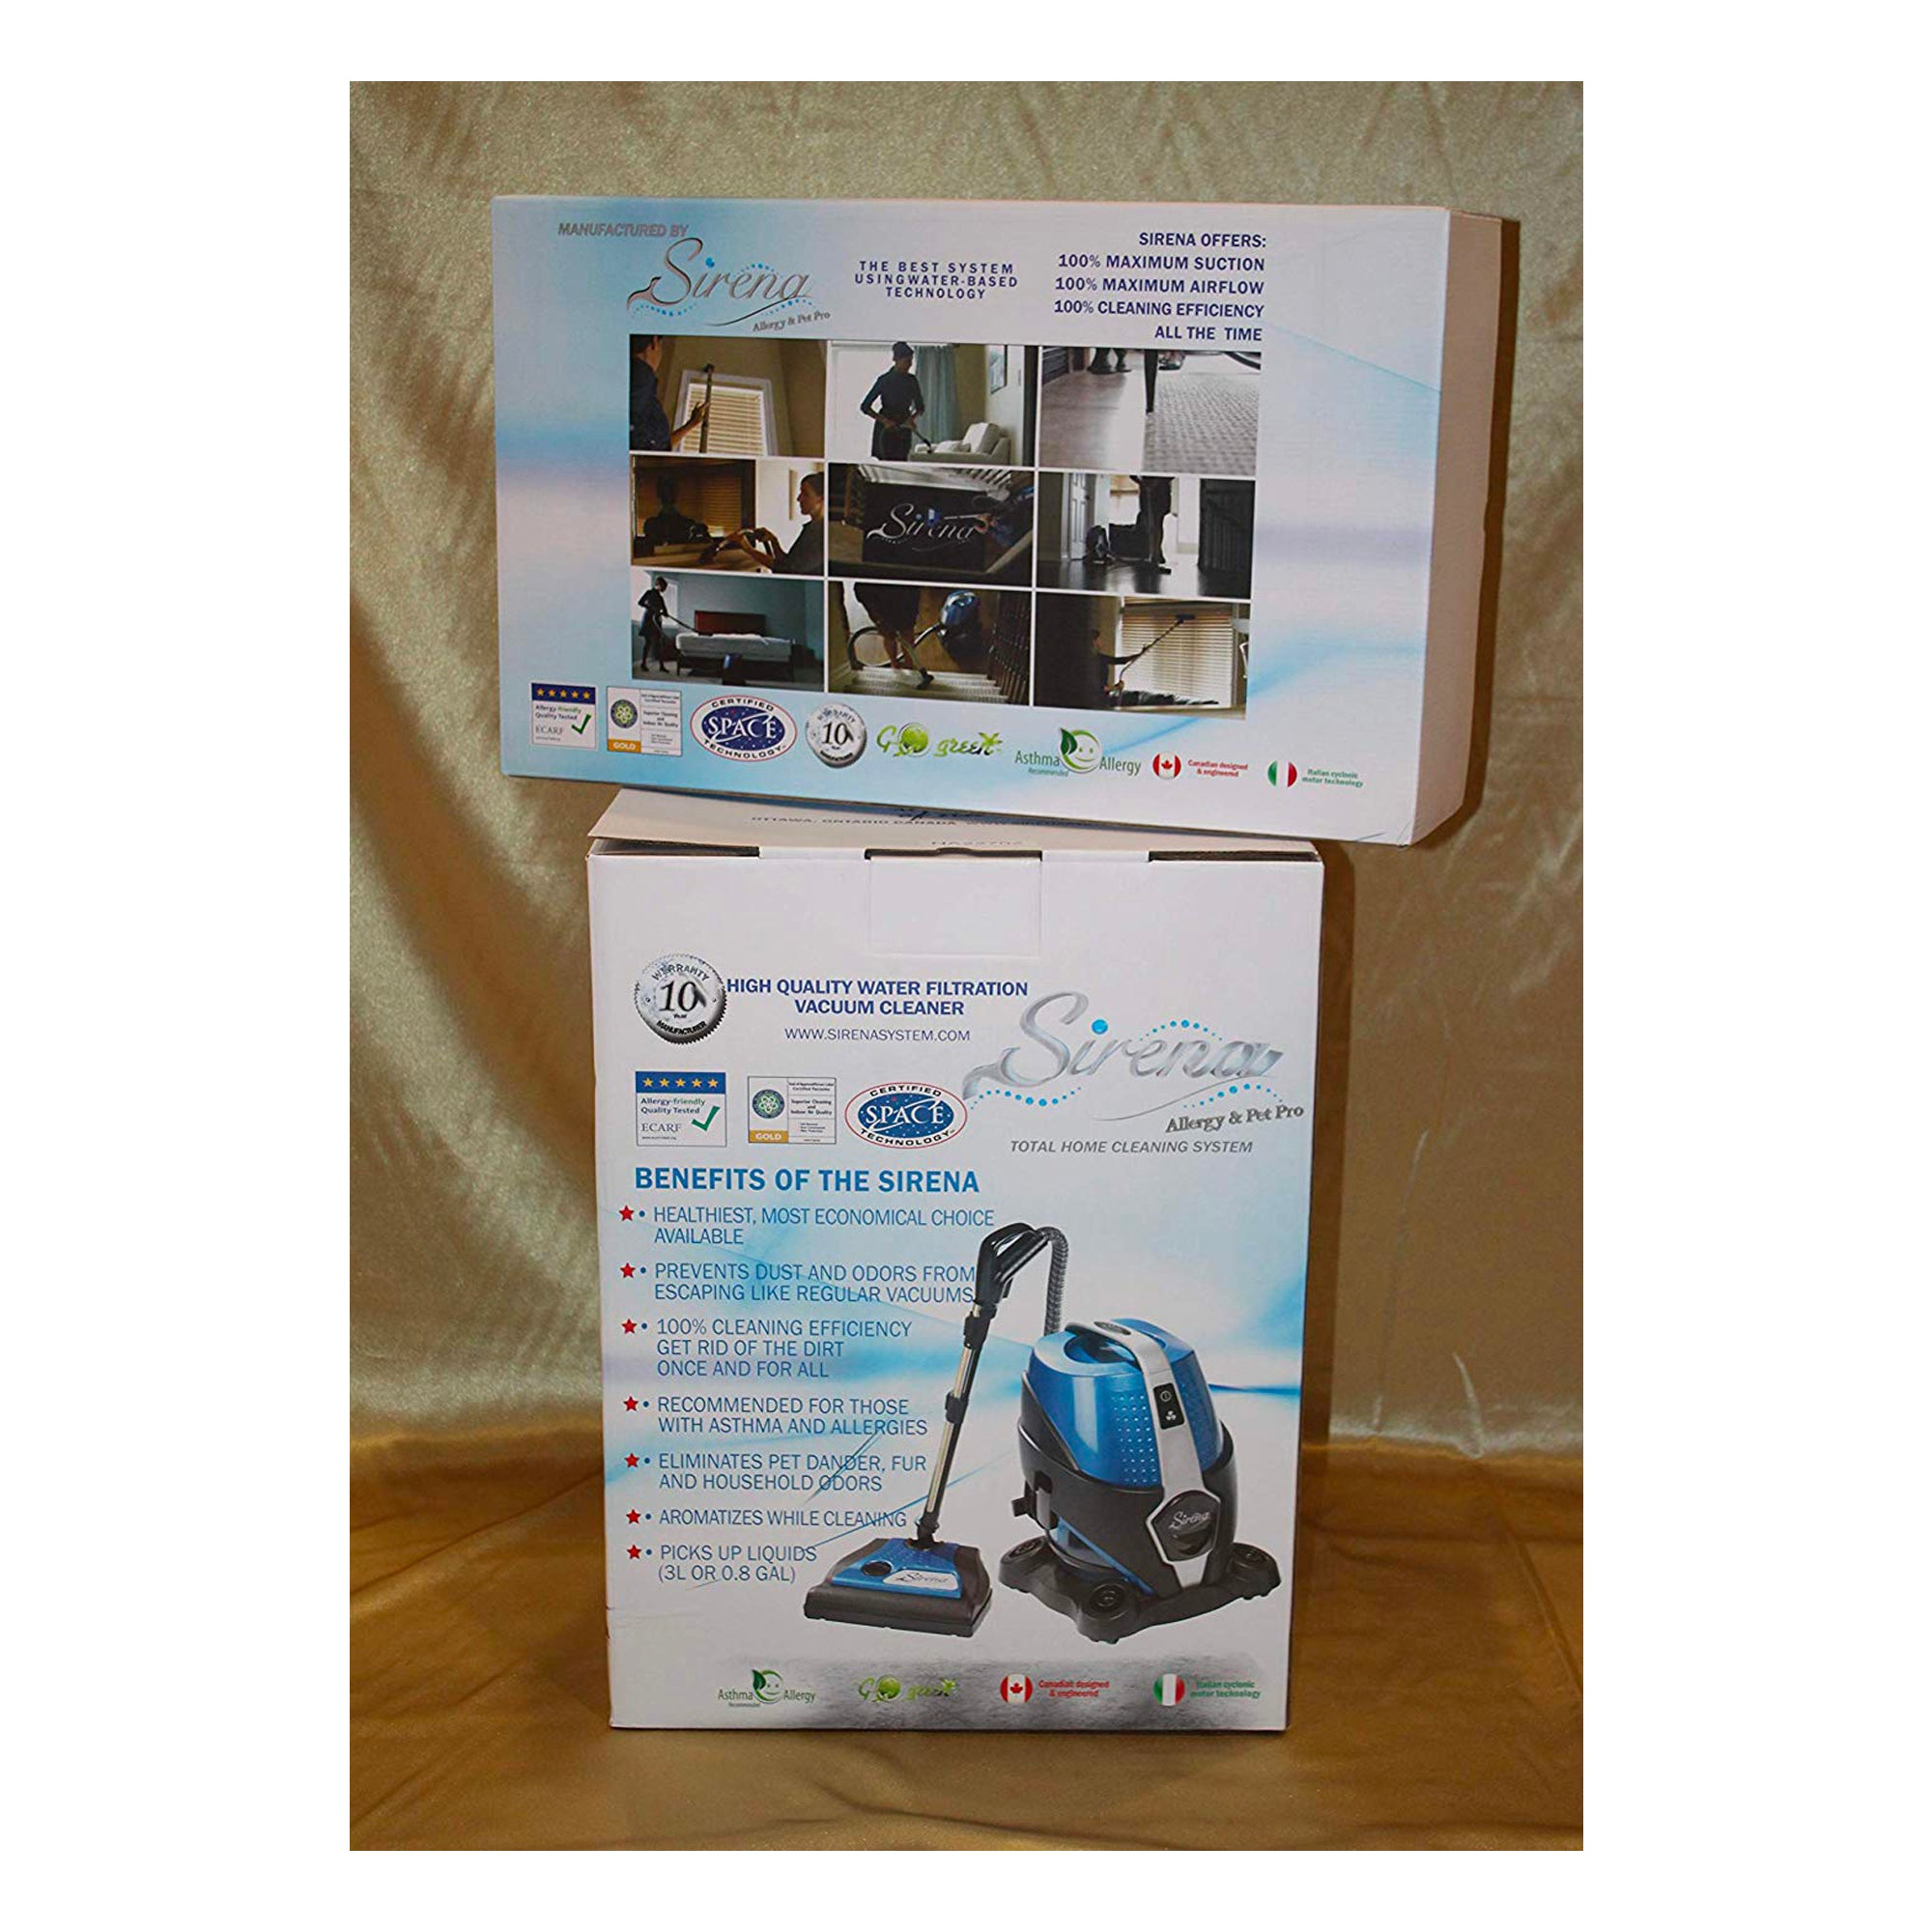 Sirena Canister Vacuum Cleaner - Packaging